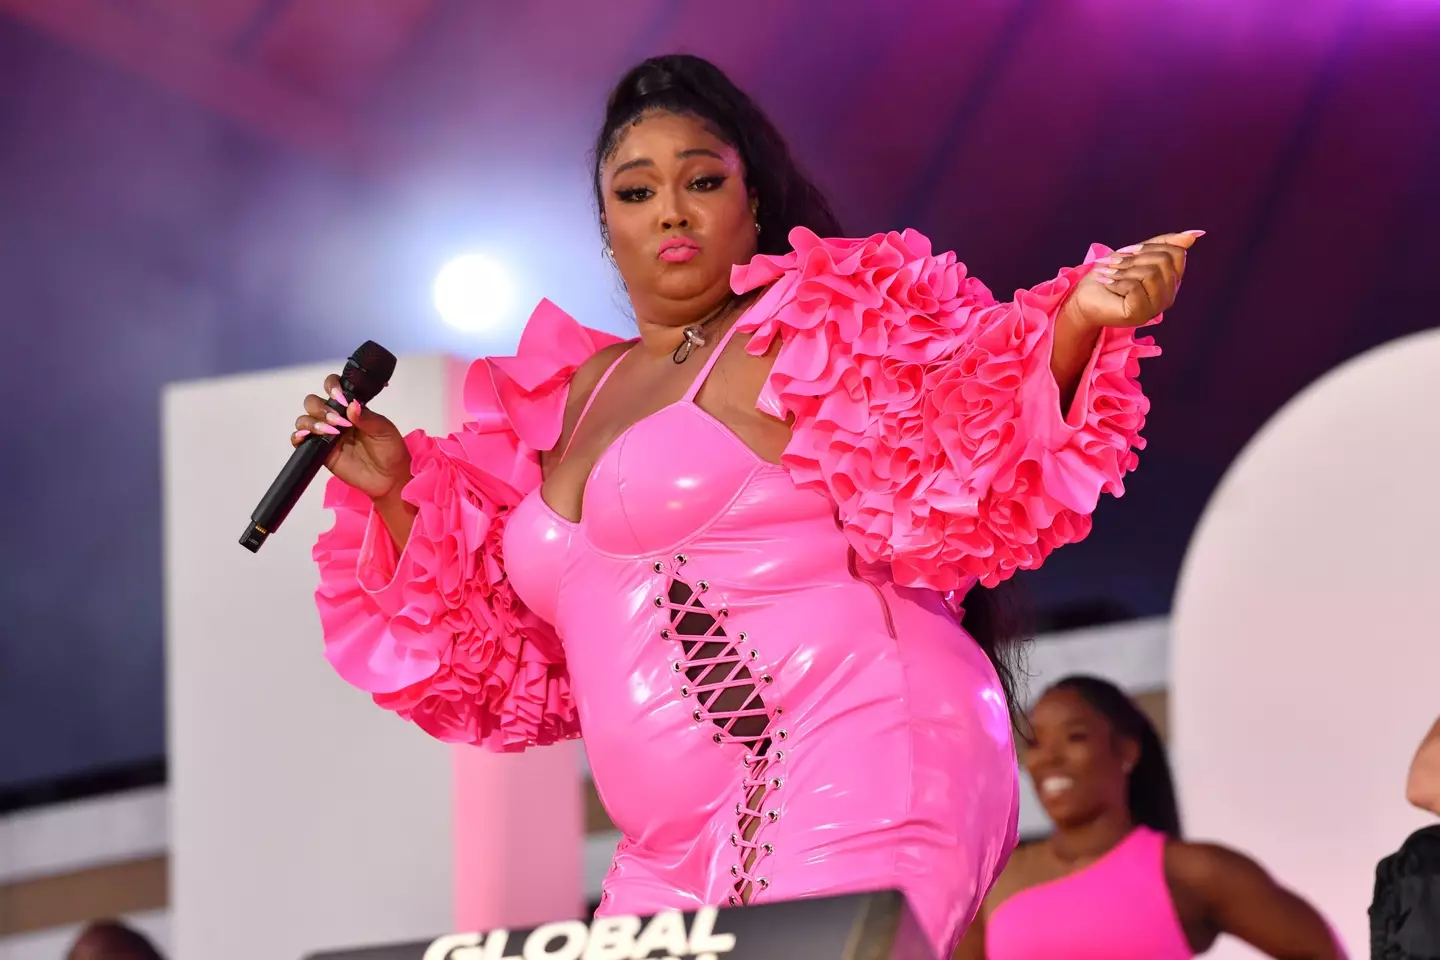 Lizzo performs at 2021 Global Citizen Live: New York.